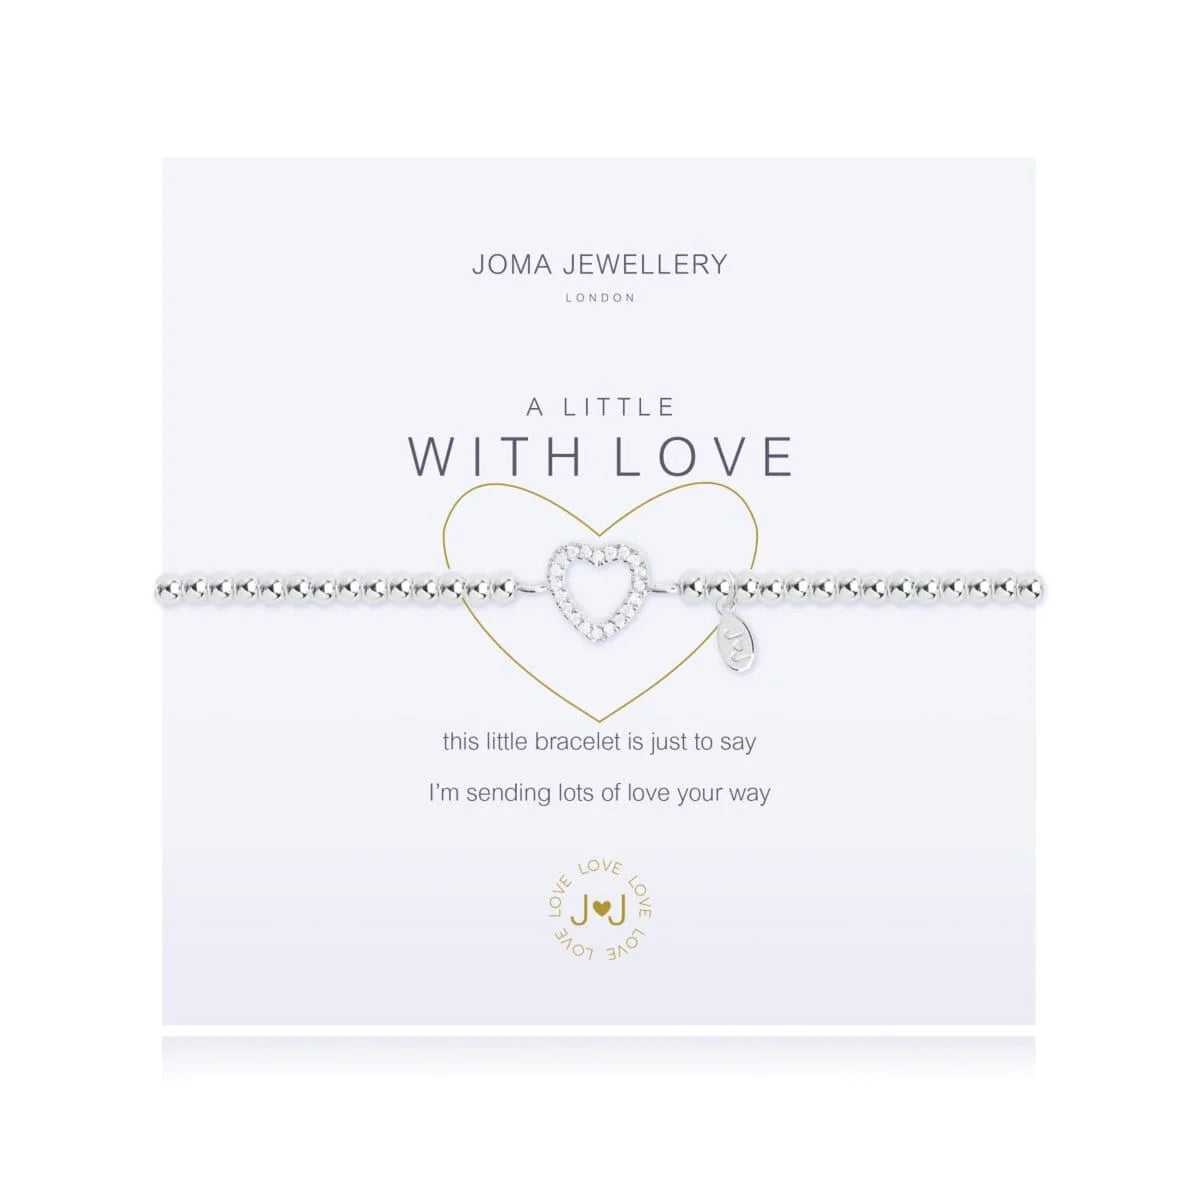 Joma Jewellery Bracelet Joma Jewellery Bracelet - A Little With Love